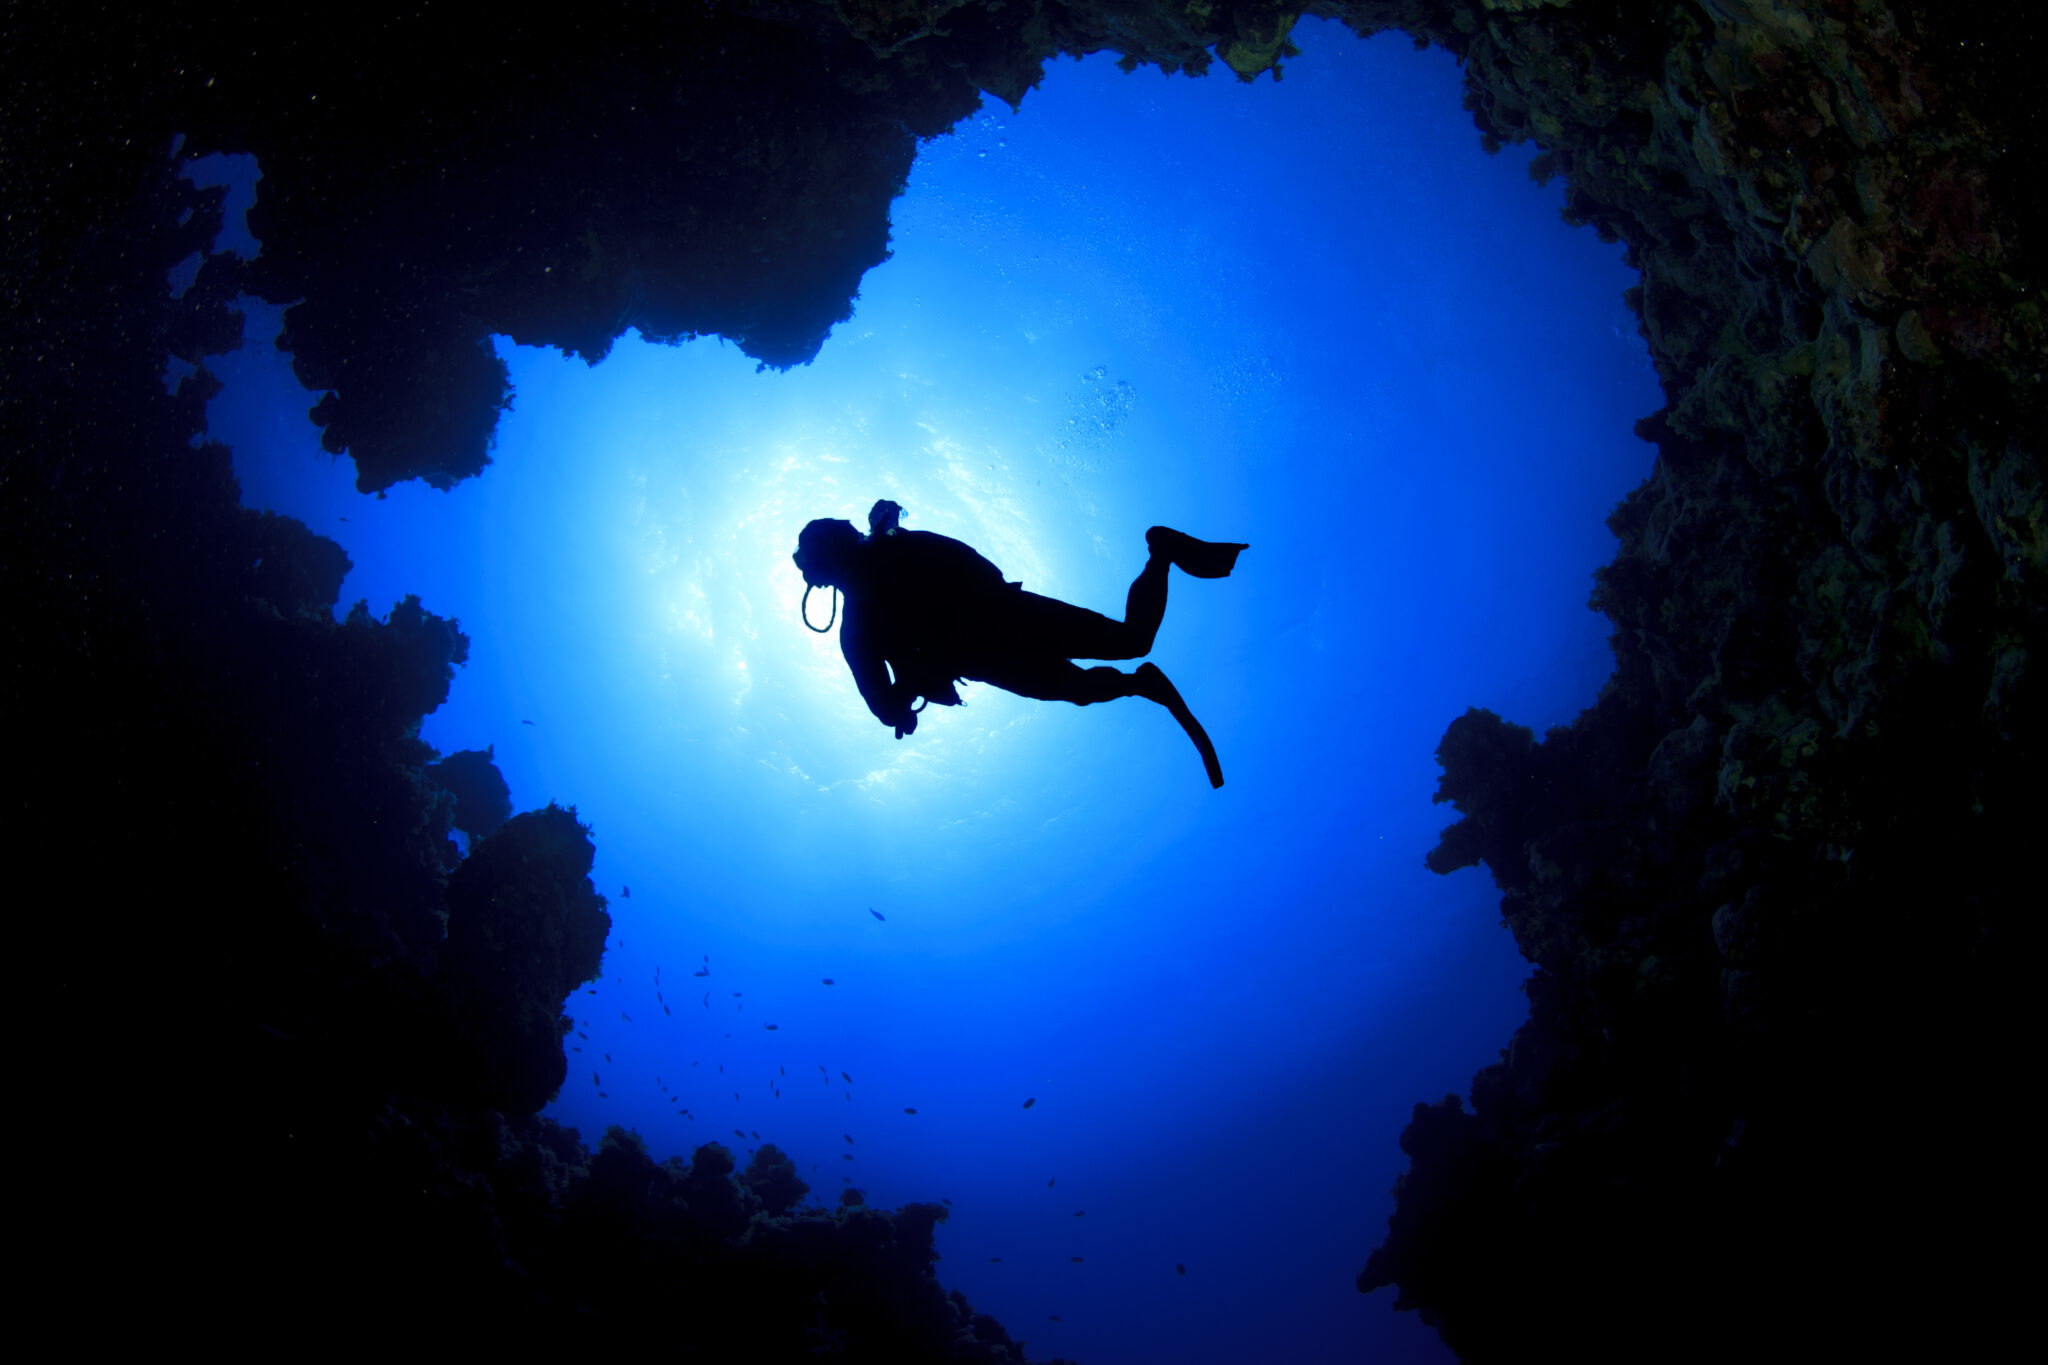 A diver swims near a cave, an experience many enjoy when diving at Great Basses Reef, one of the best Sri Lanka dive sites